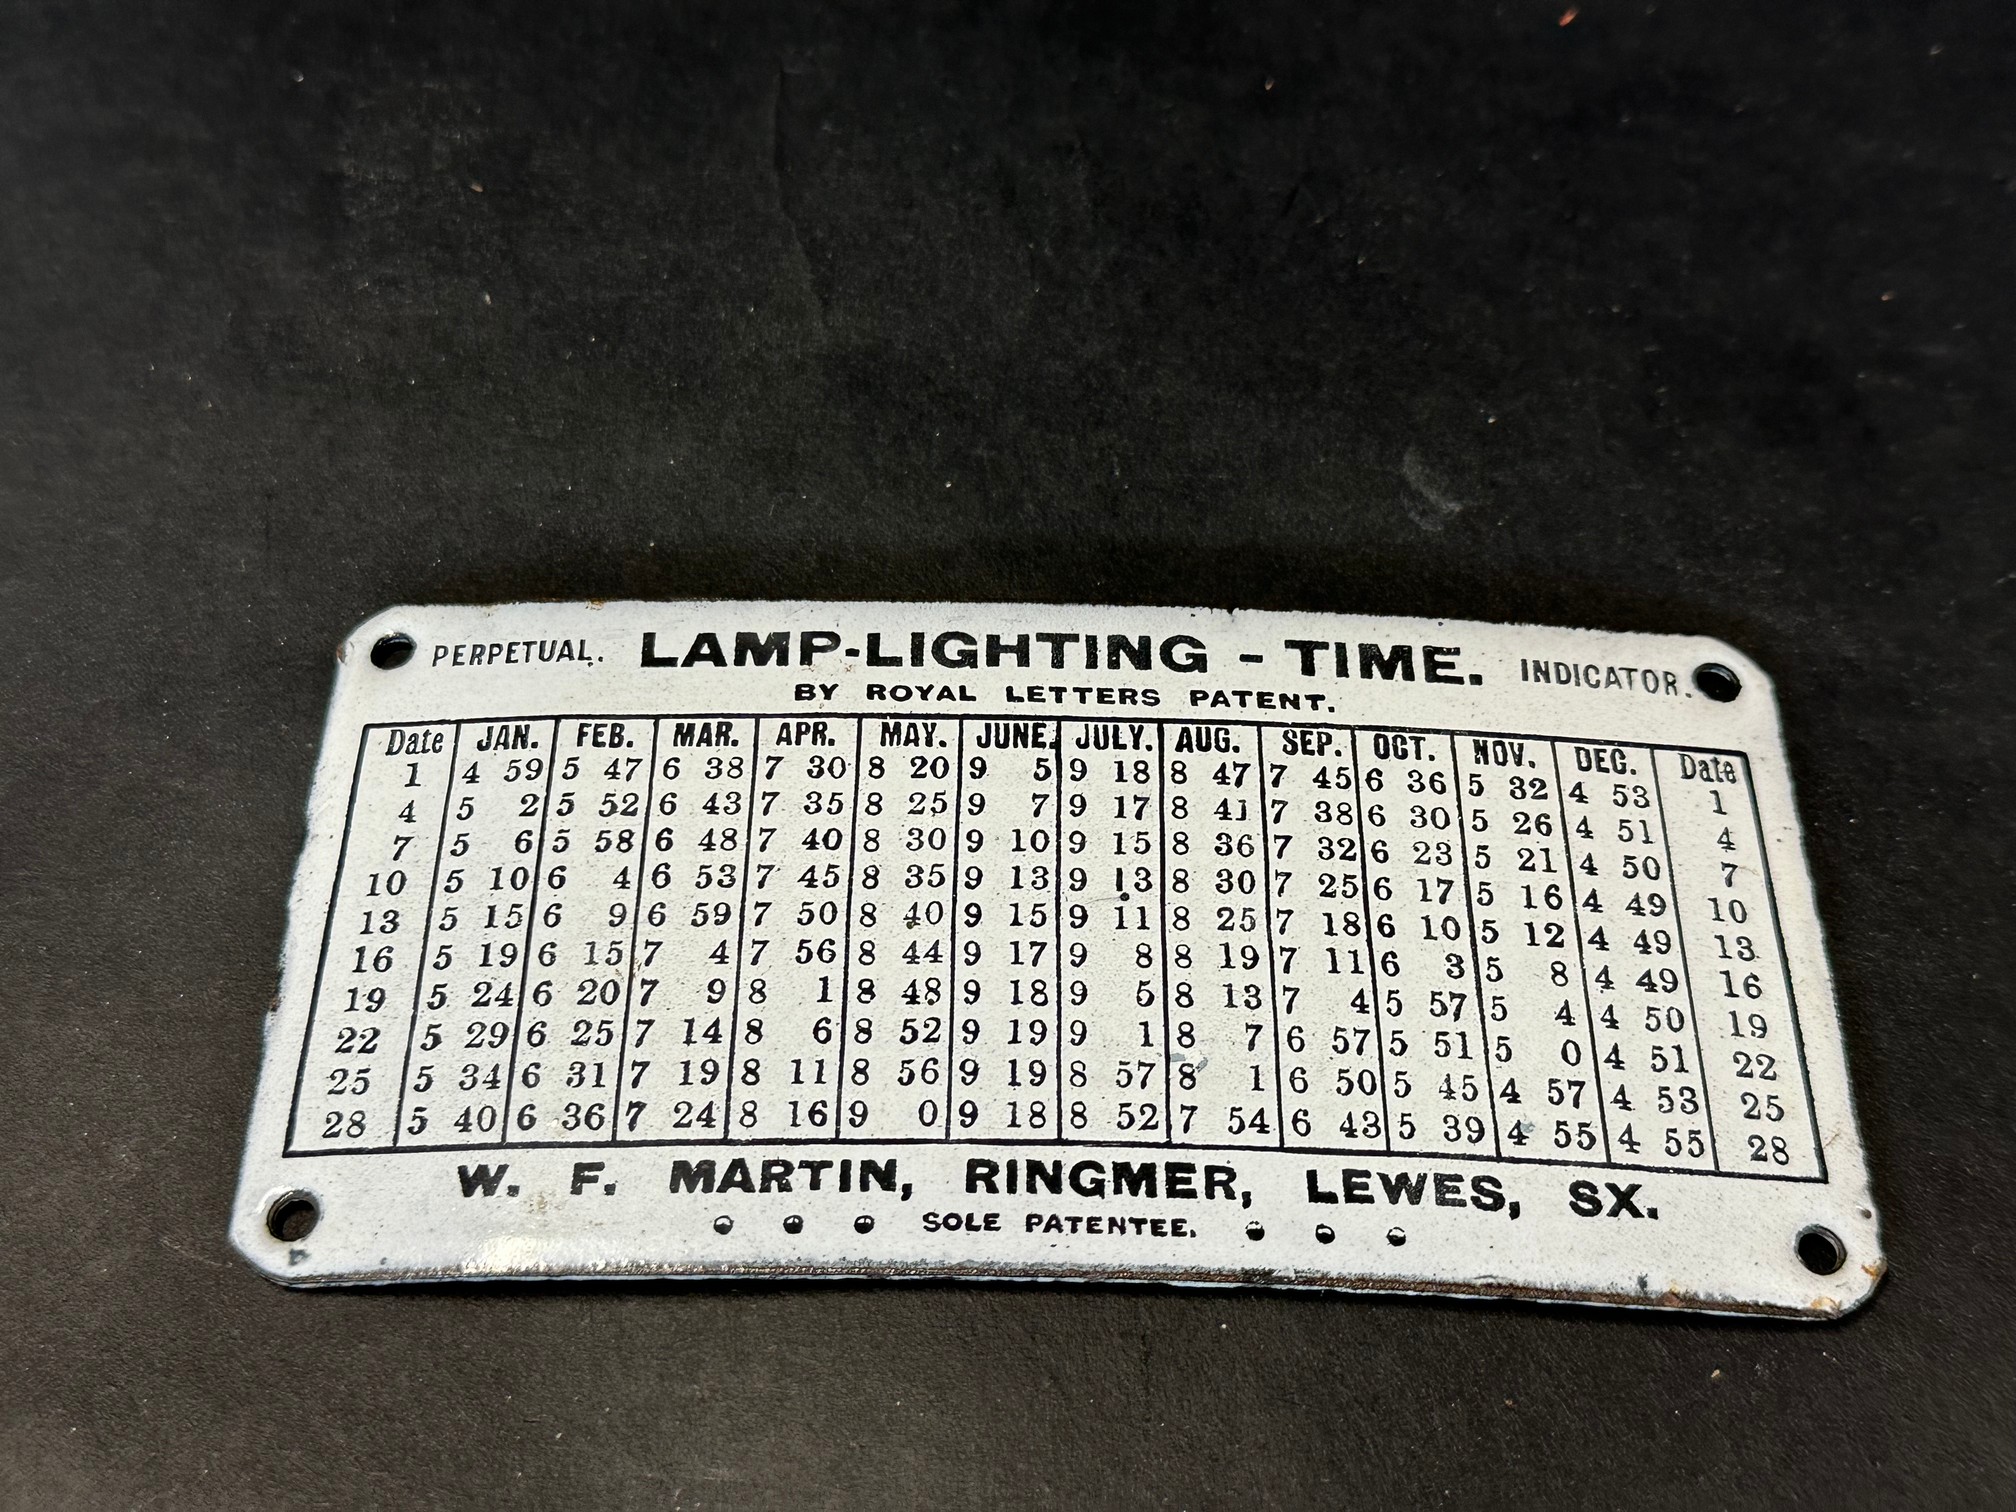 A small Lamp-Lighting-Time indicator sign, in very near mint condition, 6 1/4 x 3/14".